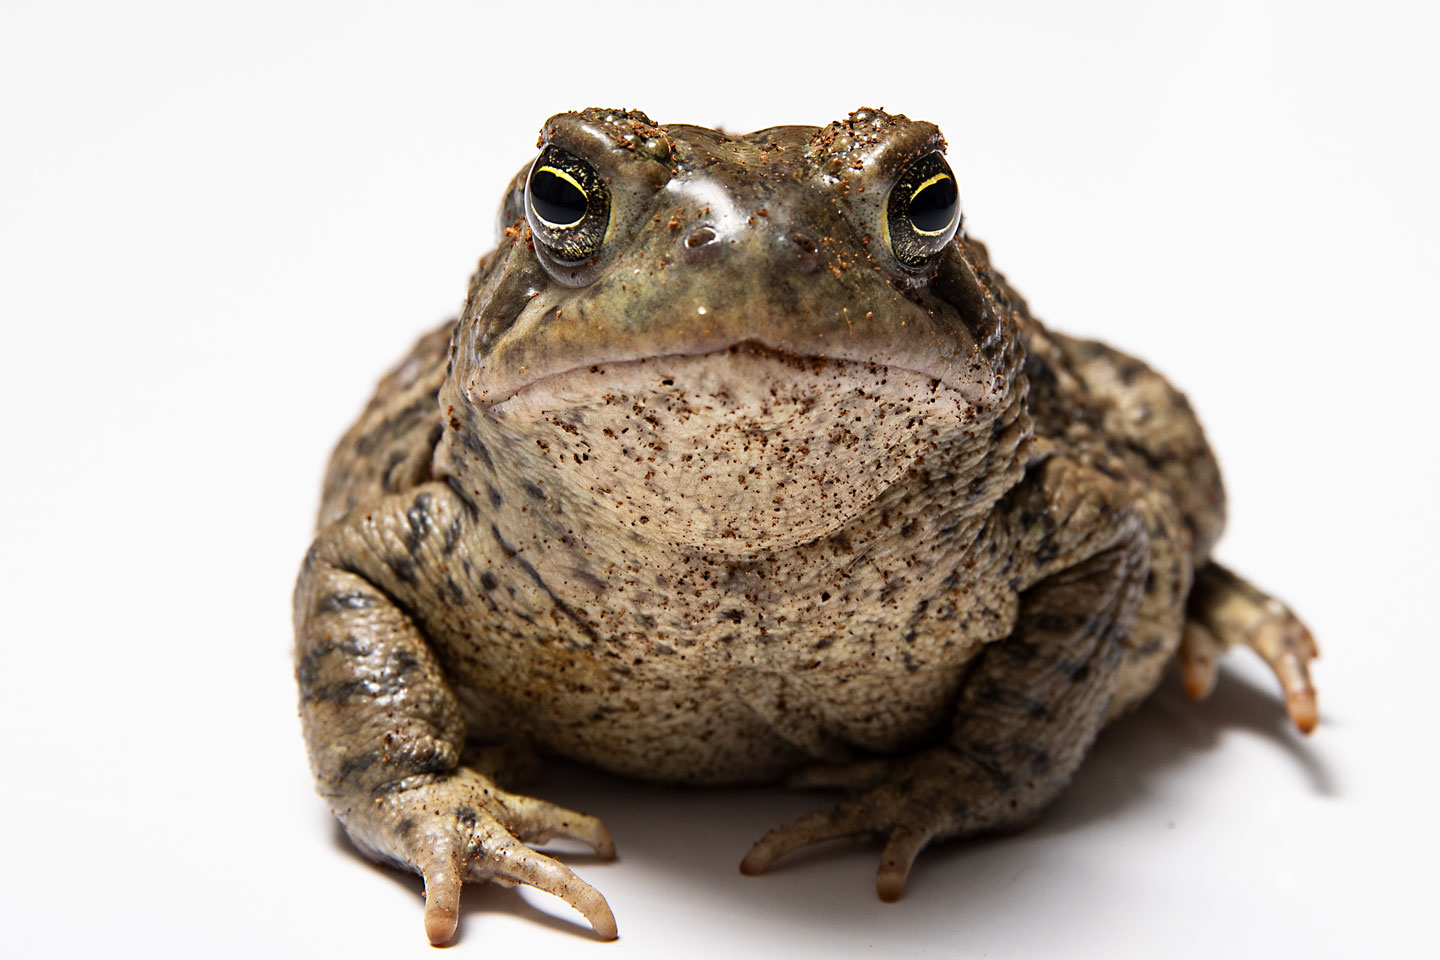 Close-up of a Woodhouse's toad